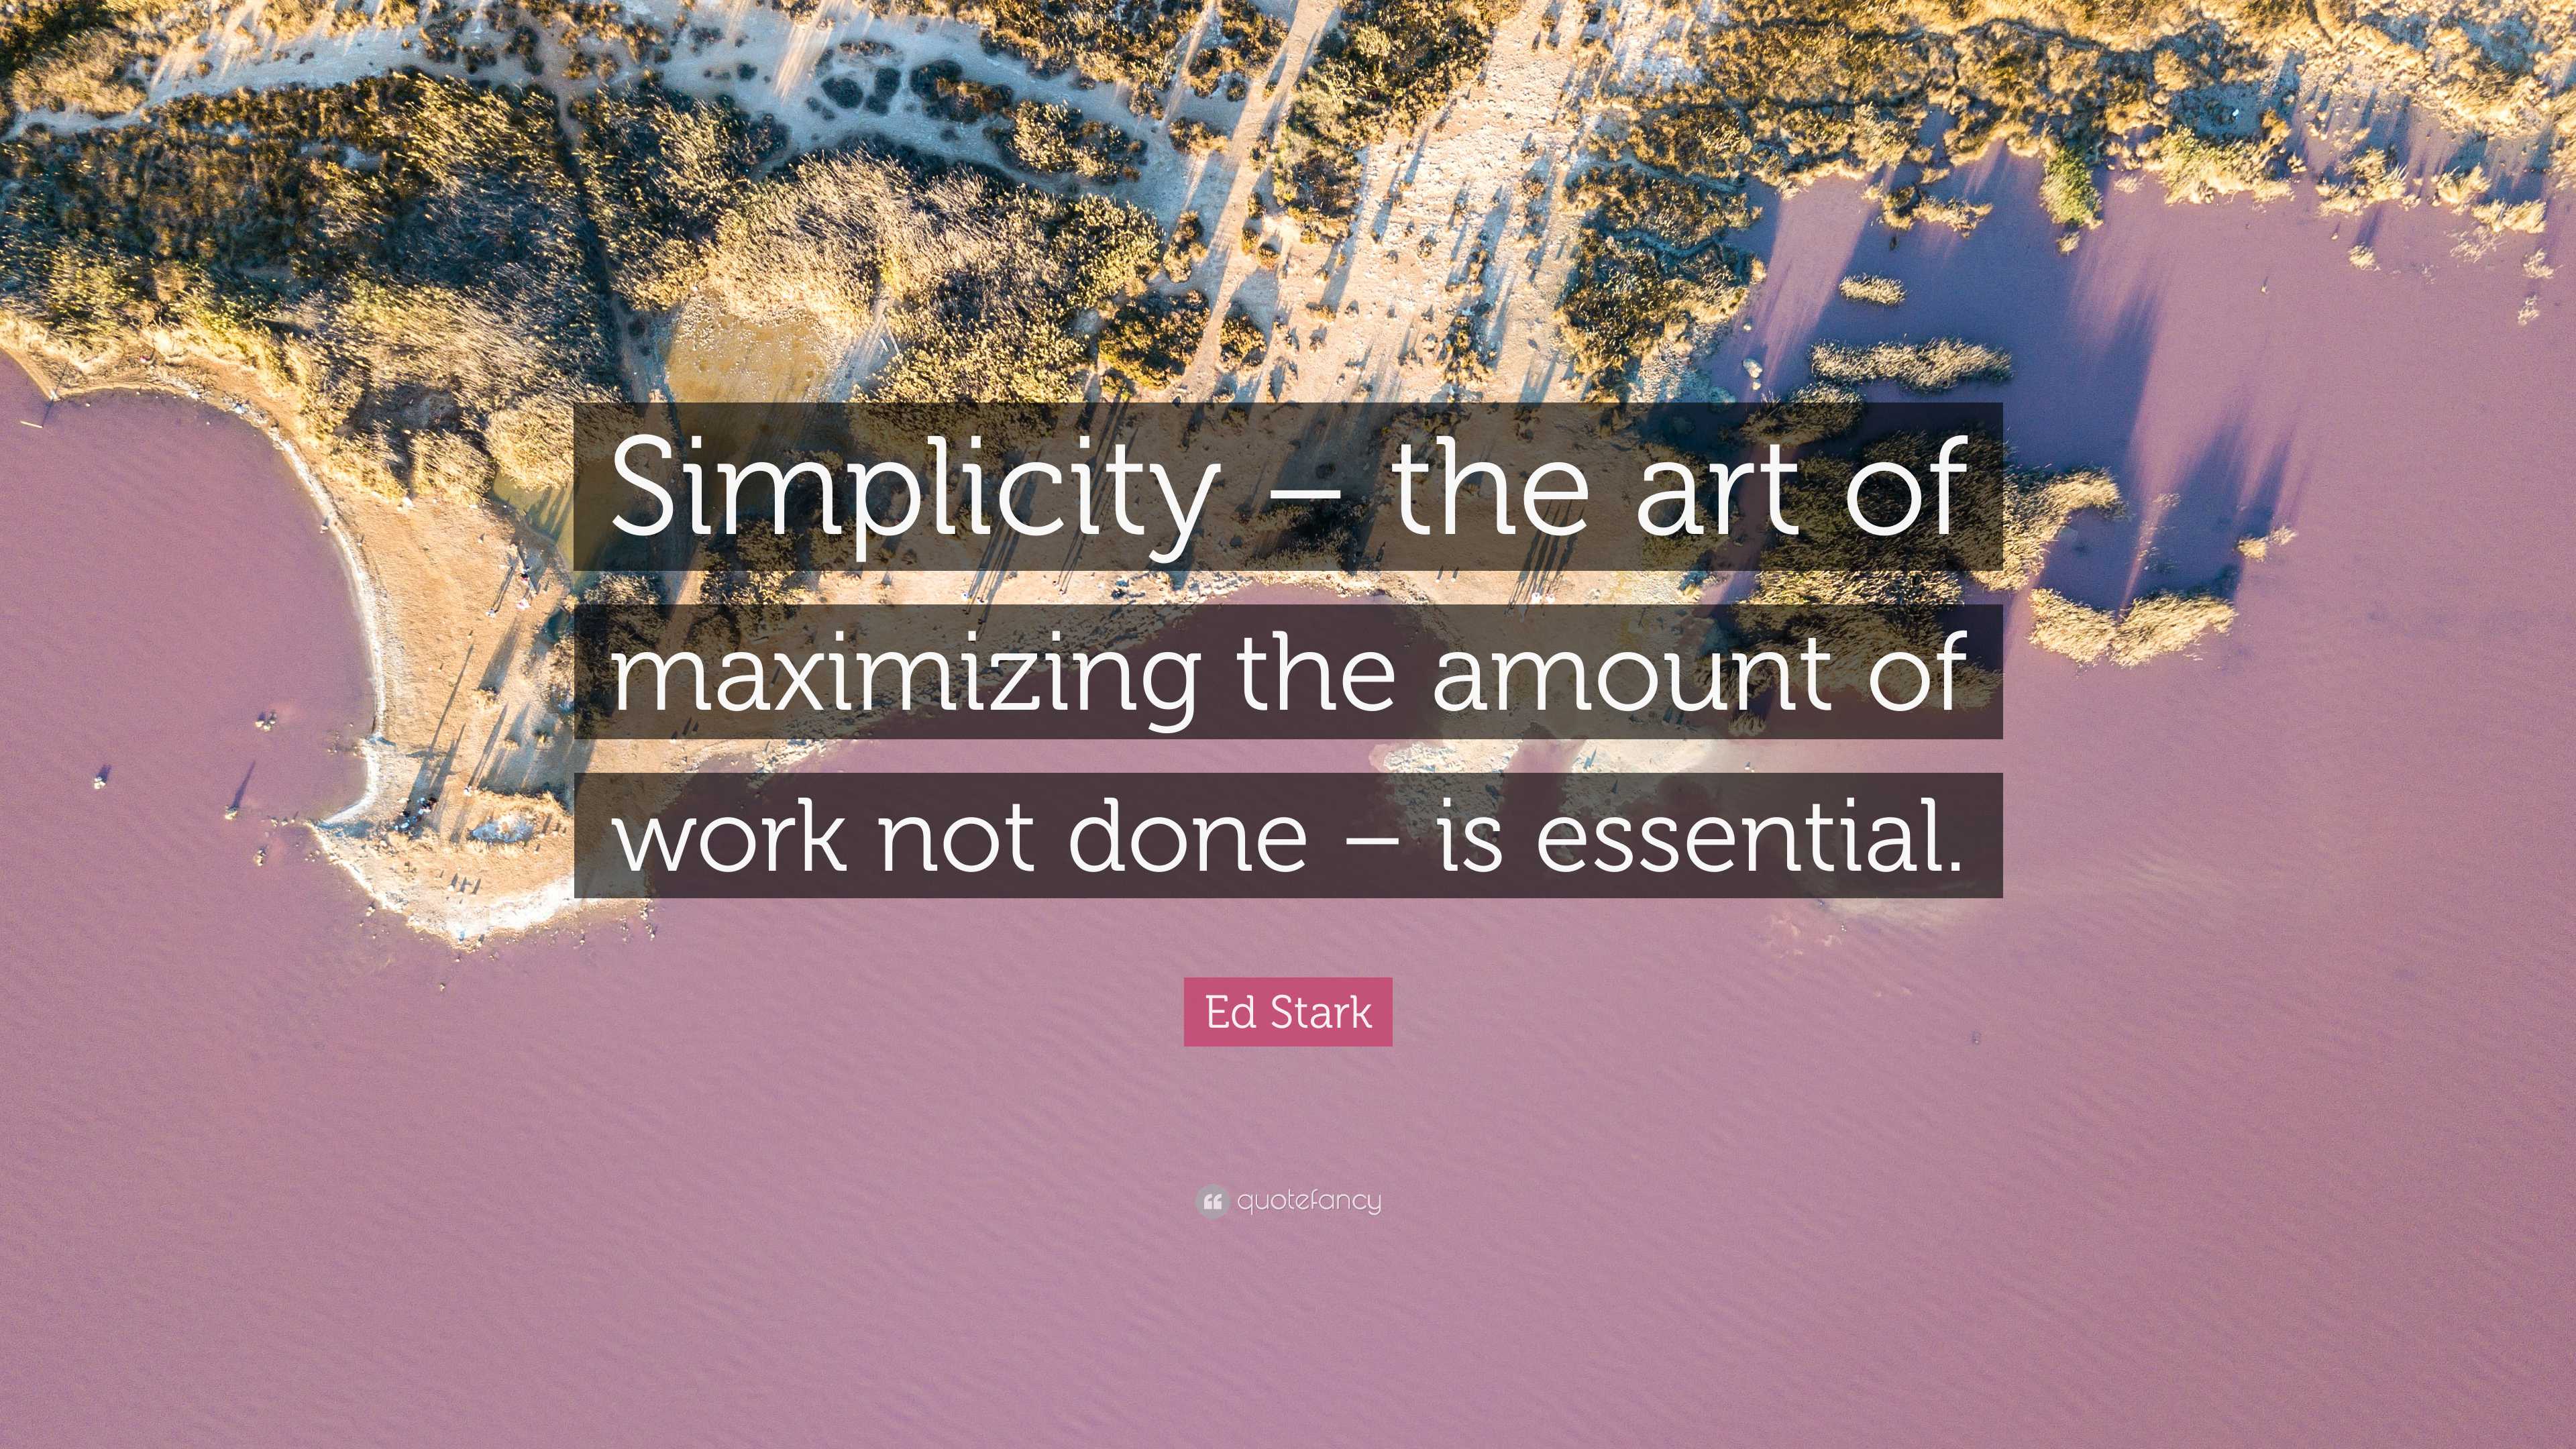 Simplicity, The Art of Maximizing the Amount of Work Not Done